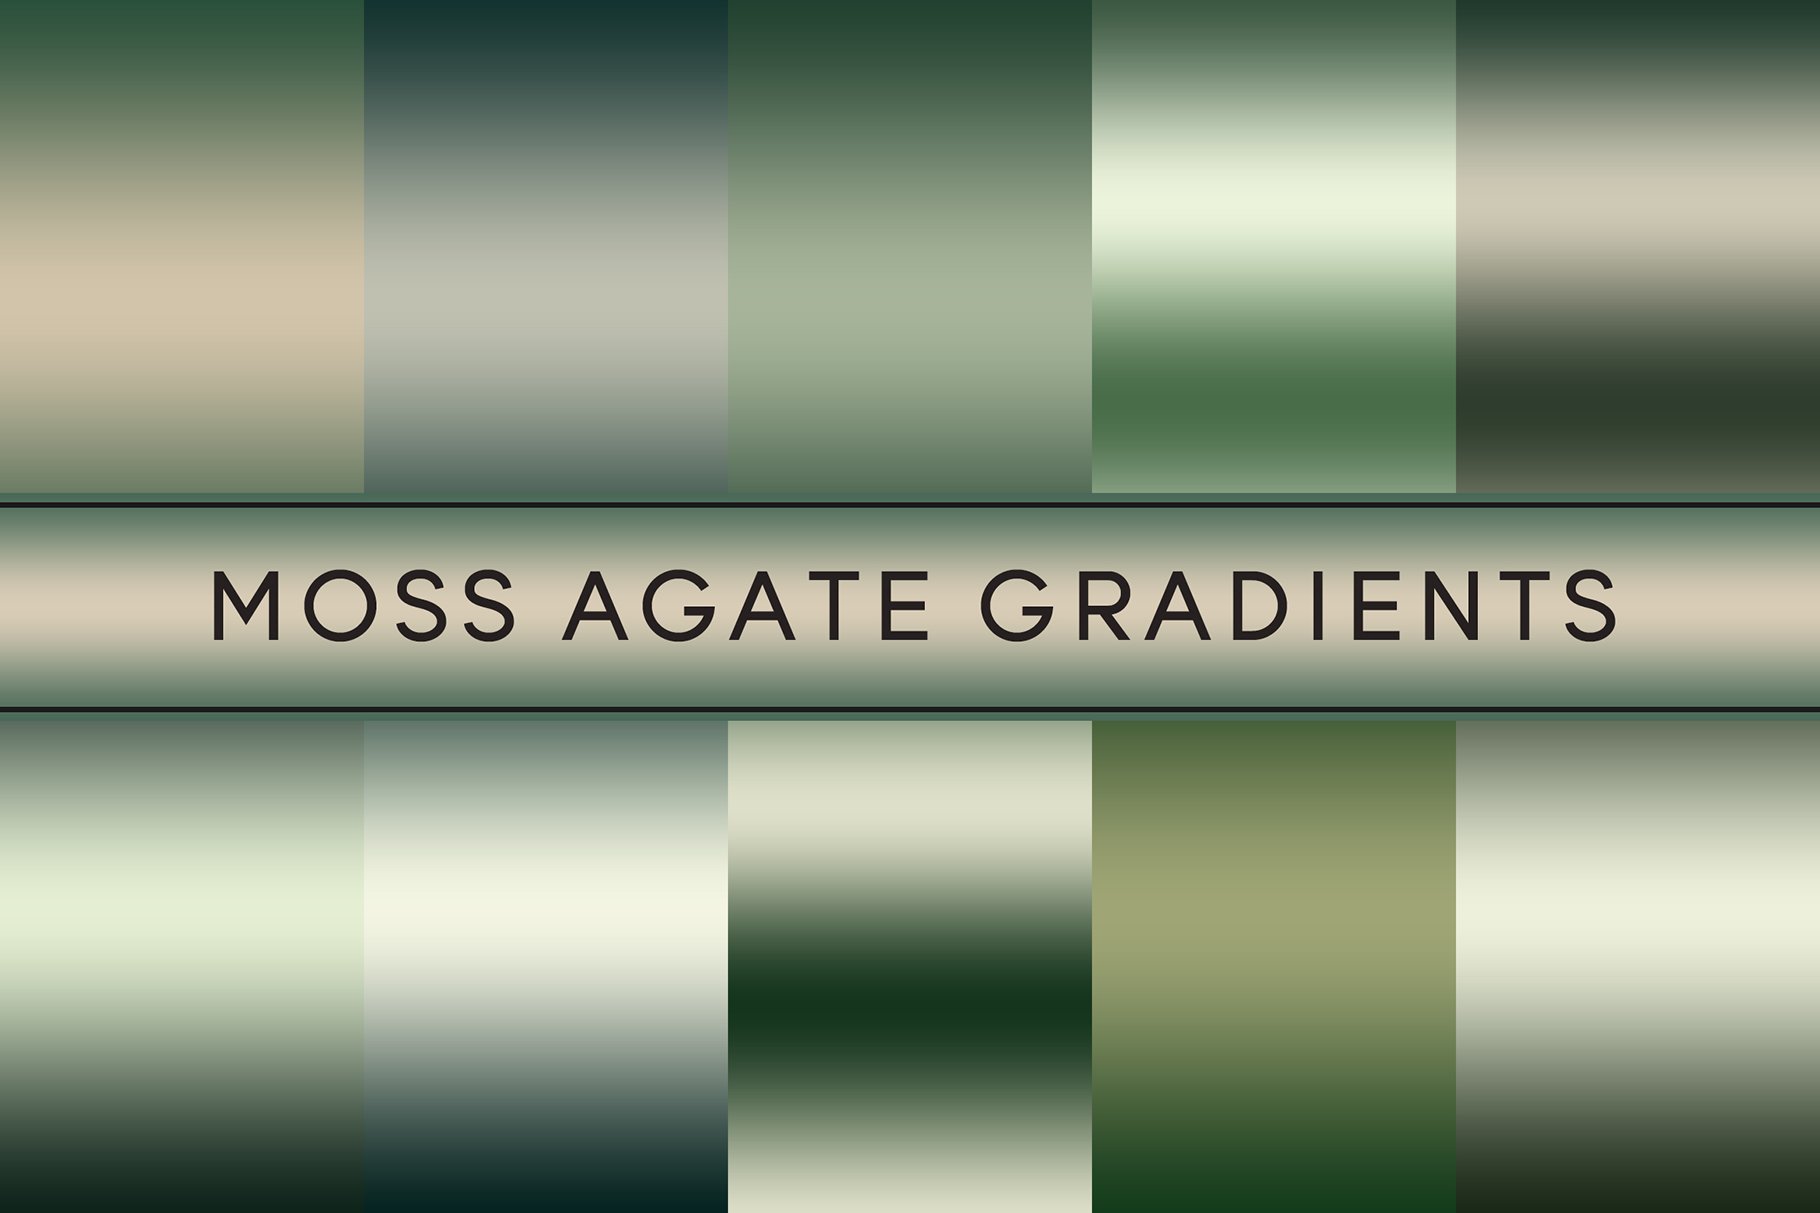 Moss Agate Gradientscover image.